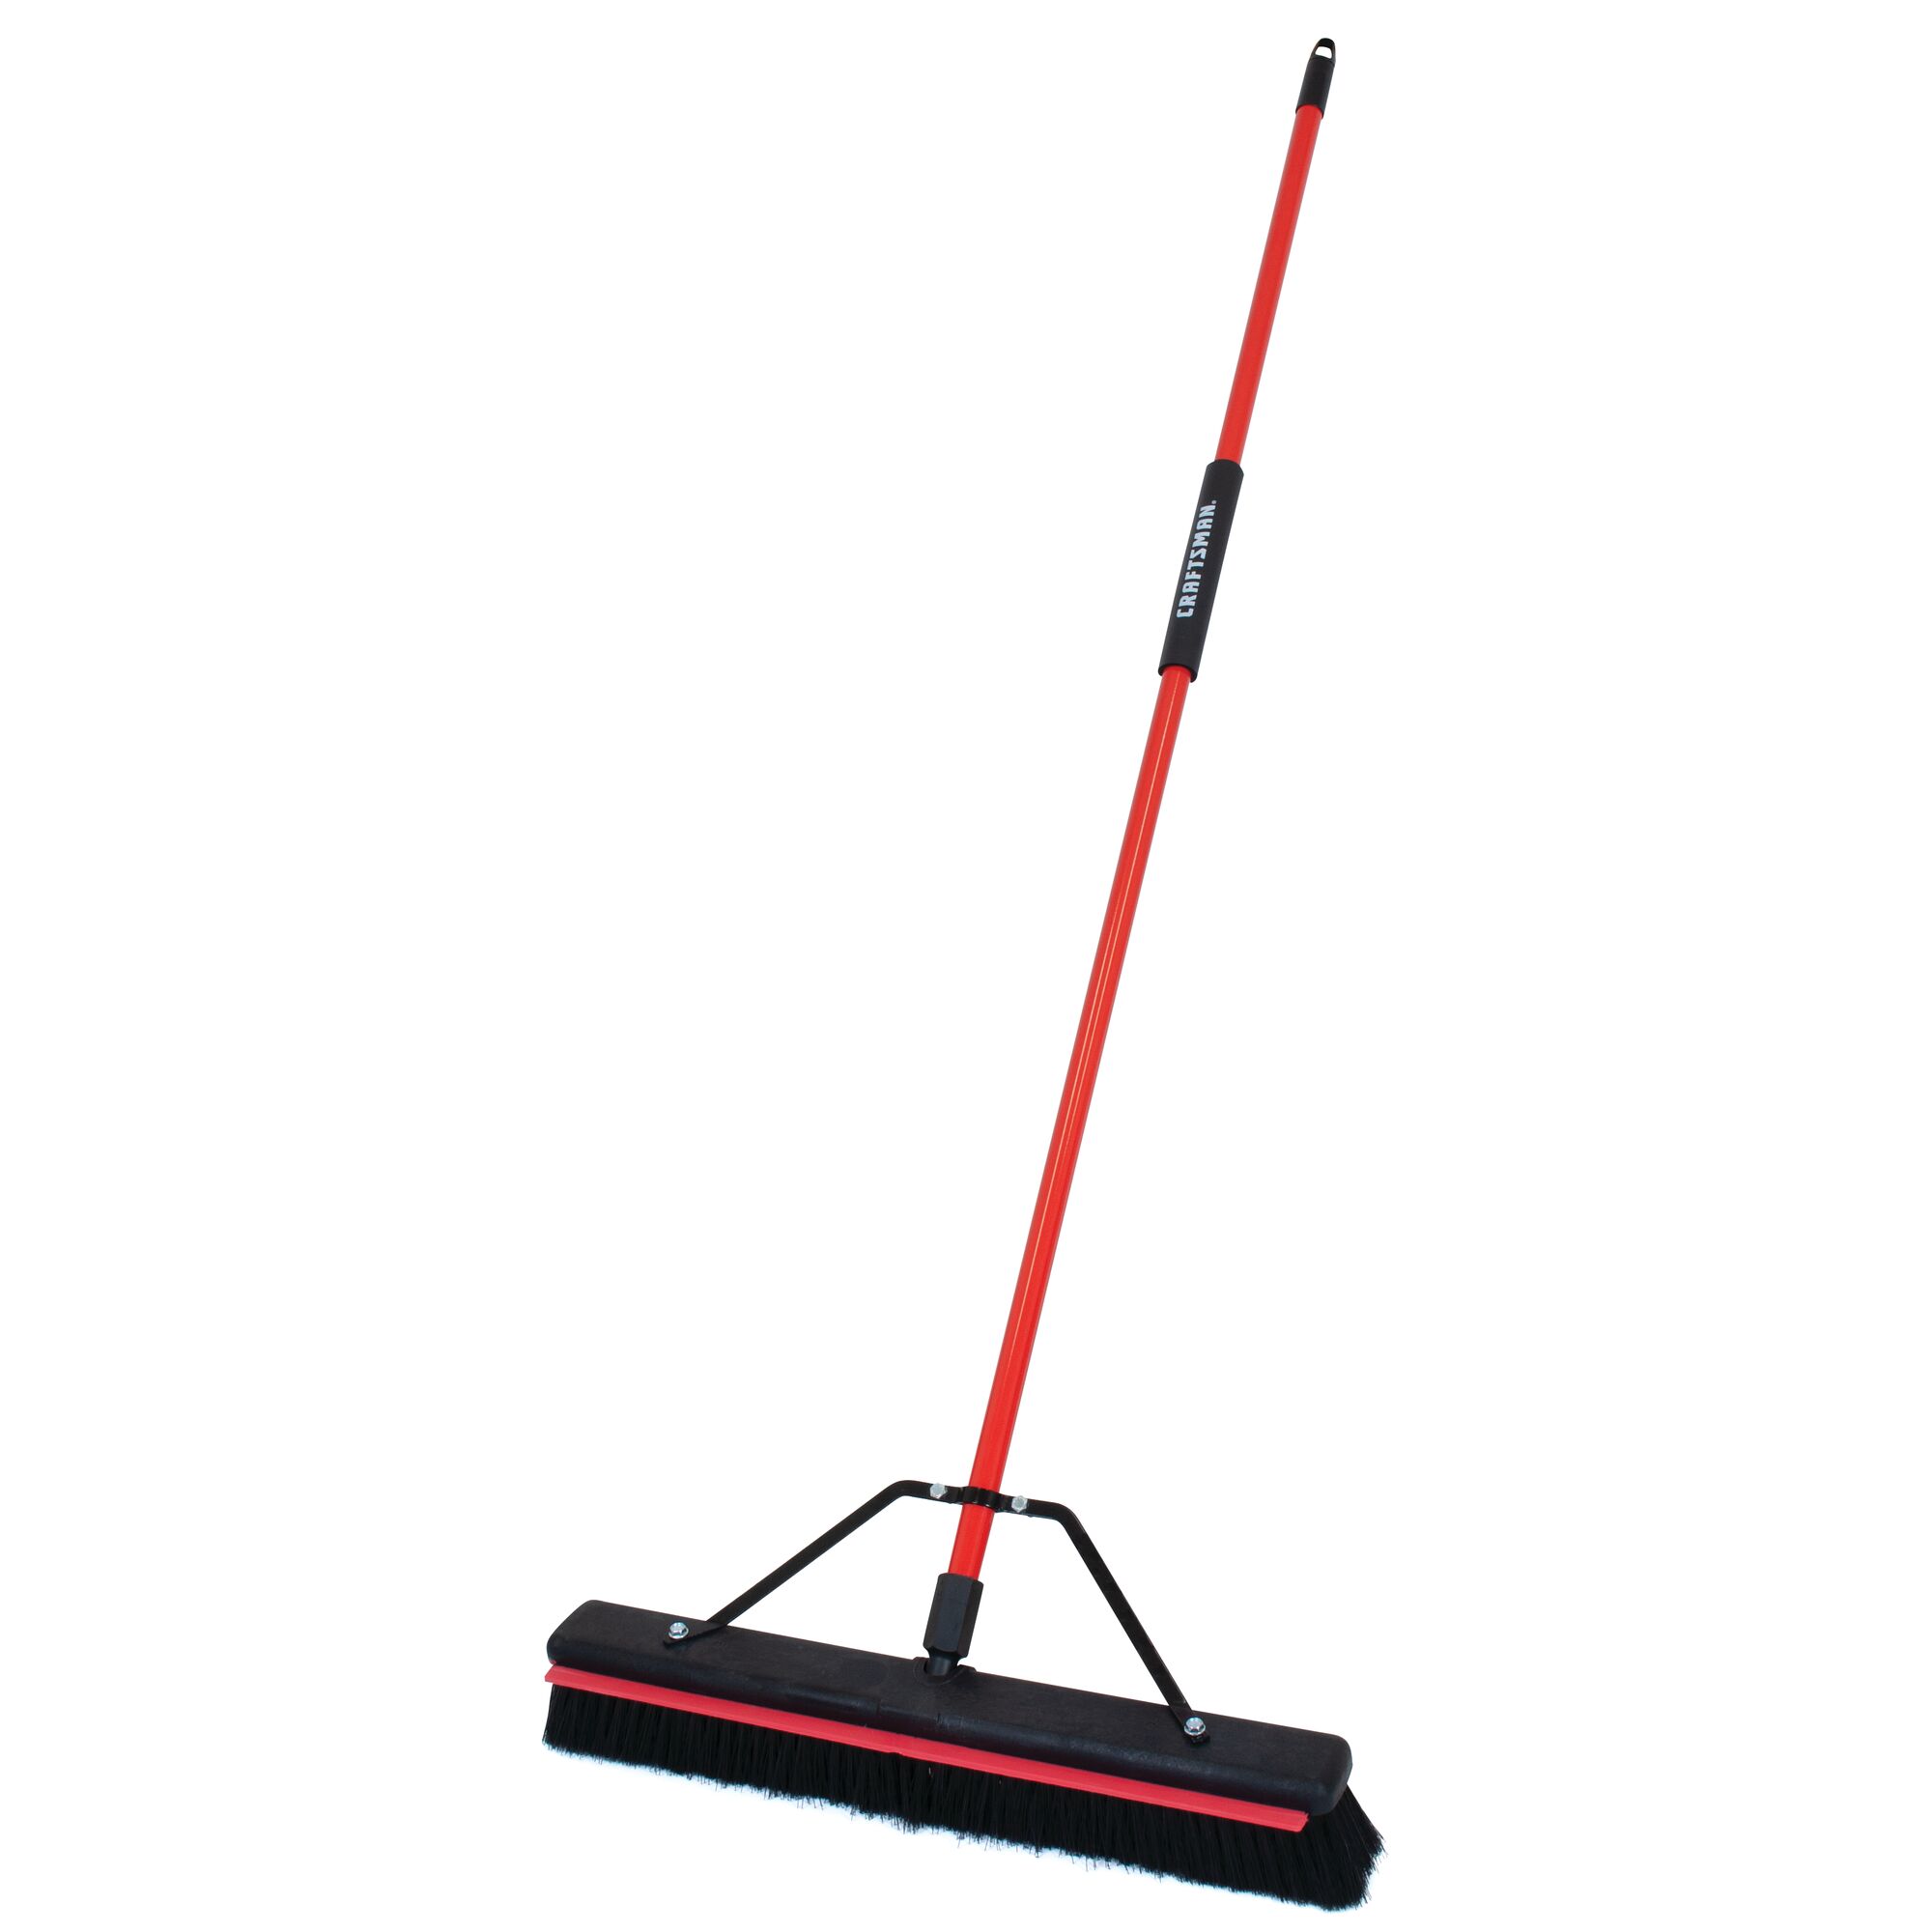 Left profile of 24 inch push broom with built in squeegee.